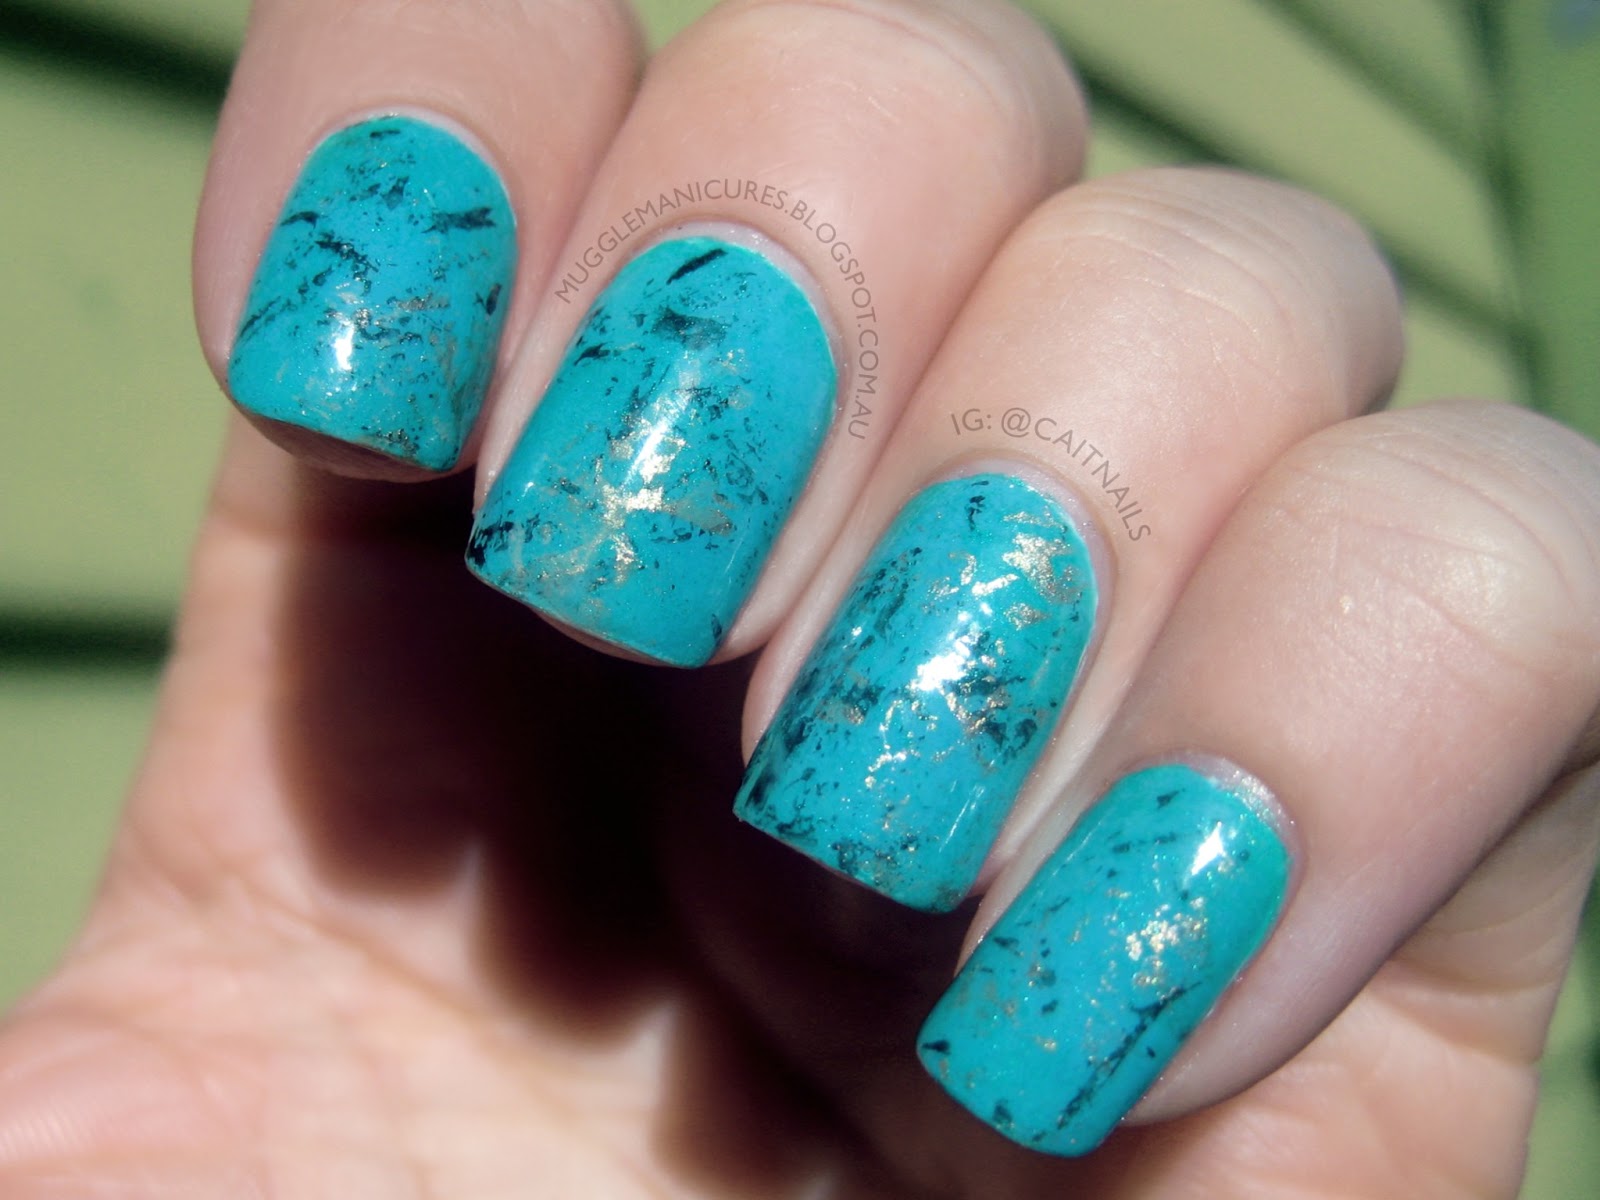 4. Brown and Turquoise Glitter Nails - wide 9